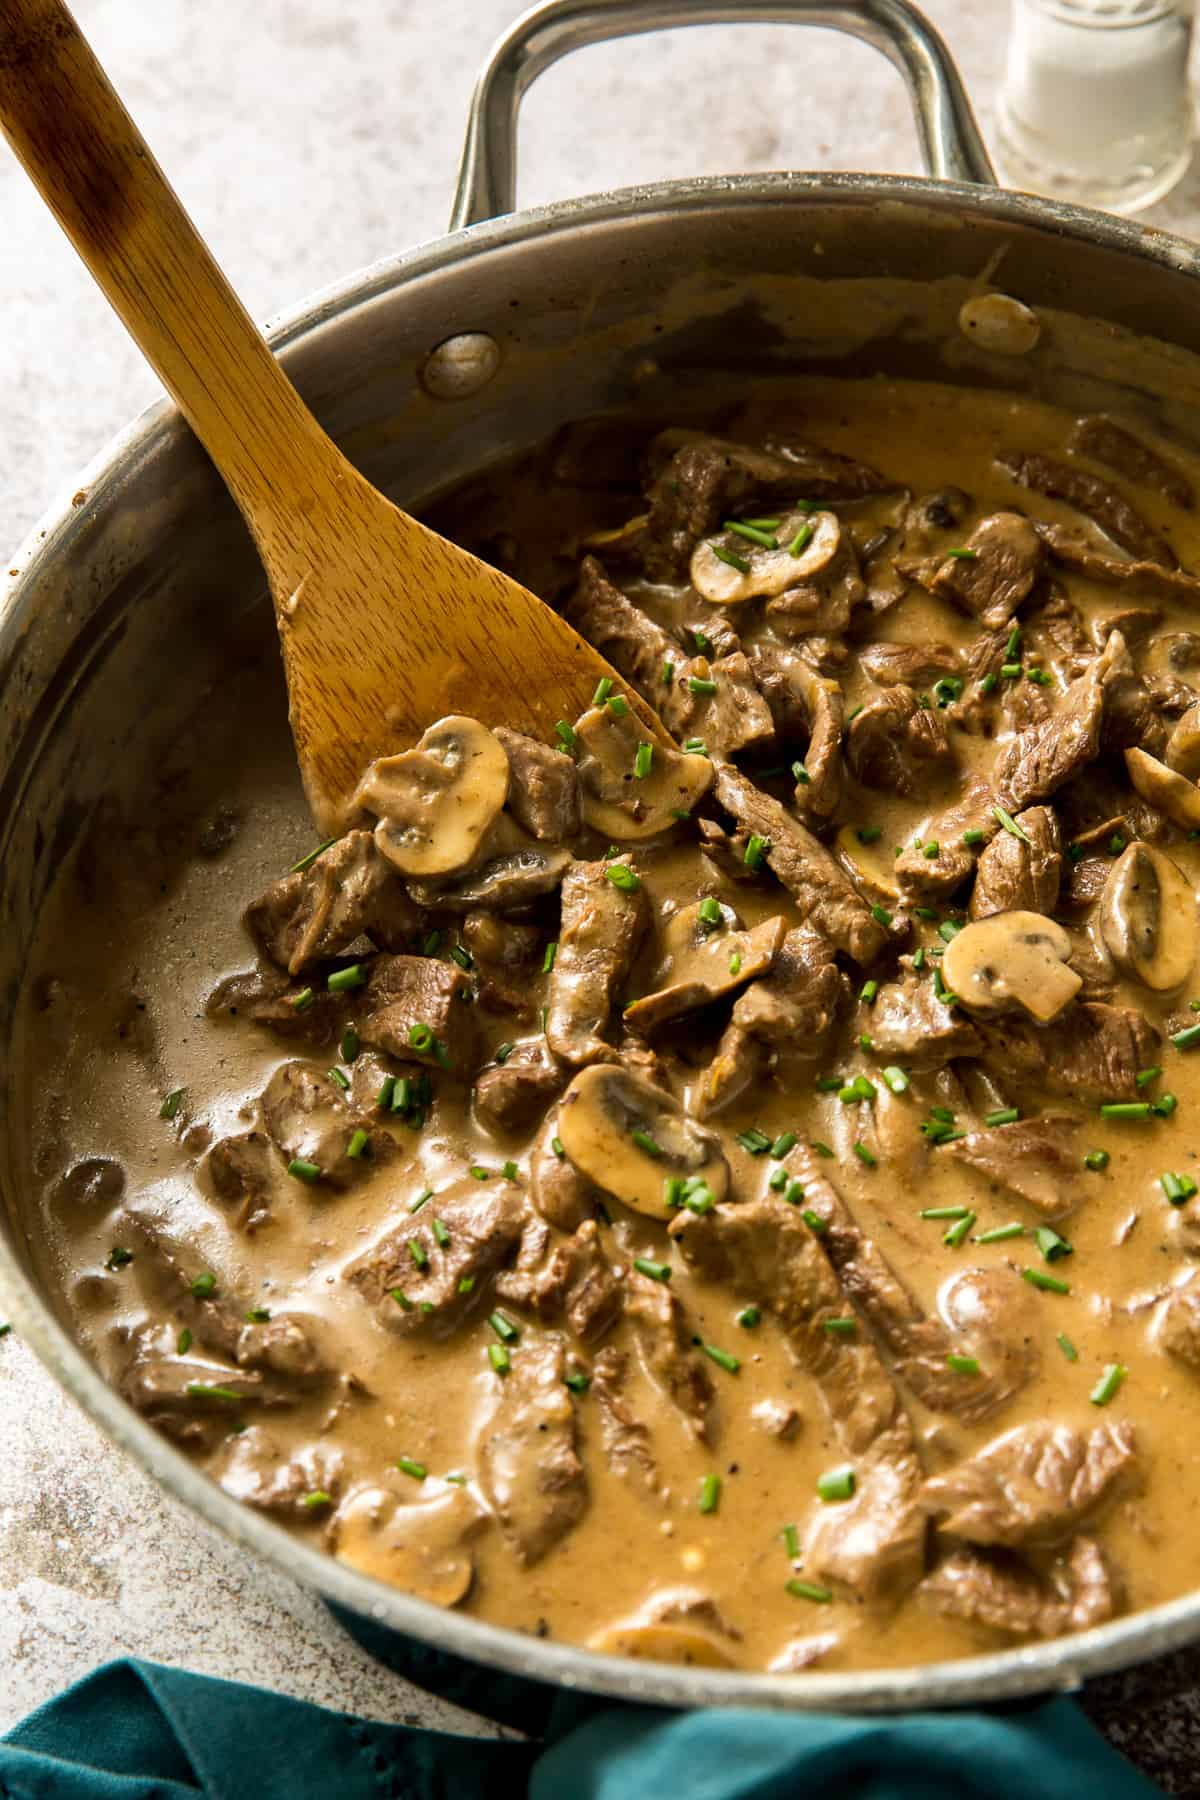 A wooden spoon resting in a skillet full of beef stroganoff.